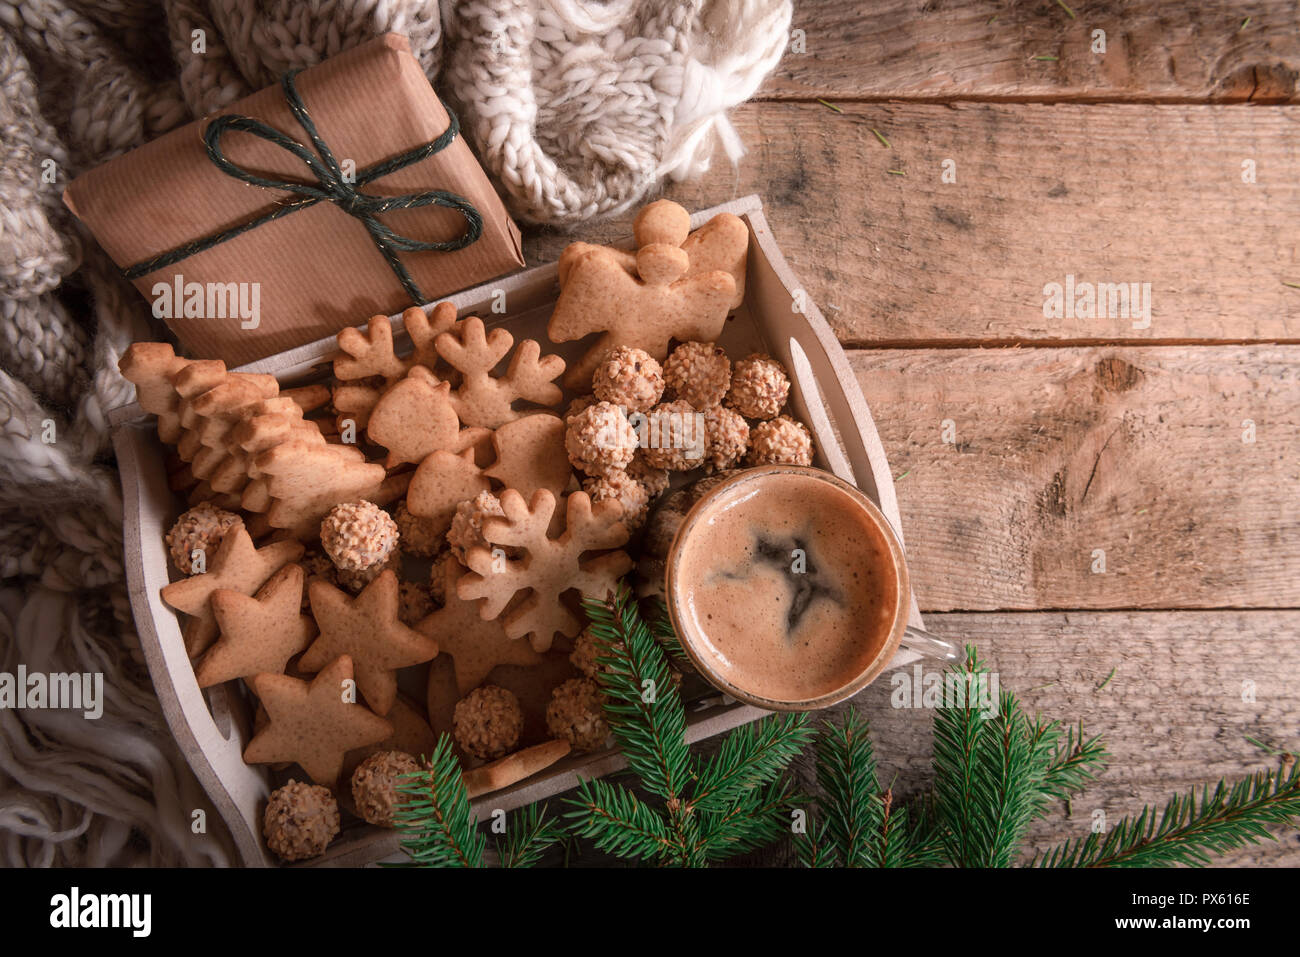 Cozy Christmas with a tray full of gingerbread, cookies and a cup of coffee, a fir twig, a gift, and a wool scarf, on a rustic table. Stock Photo